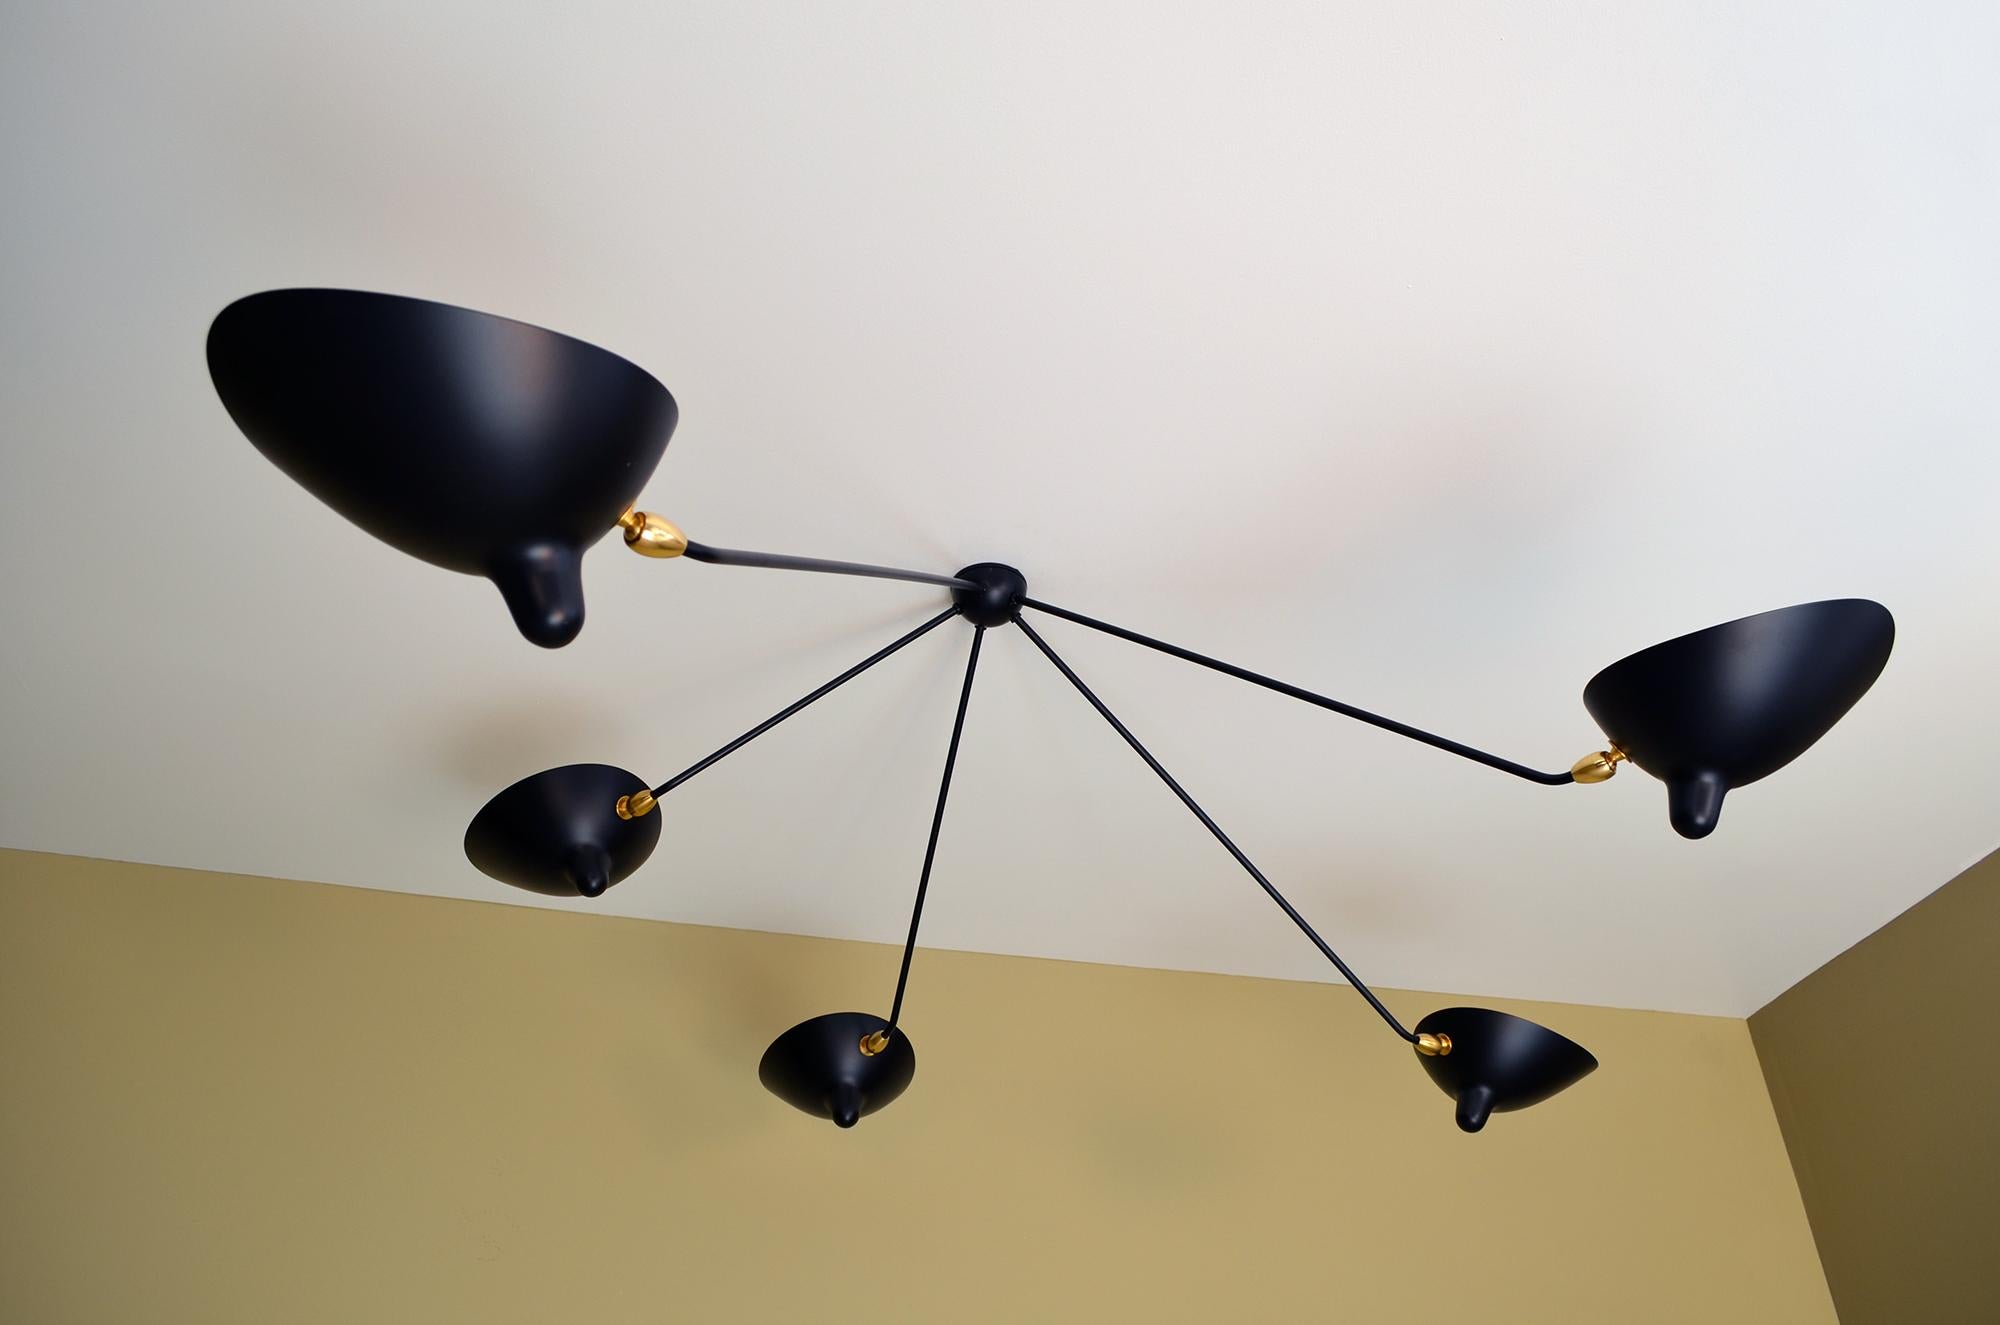 Elegance in form and function are hallmarks of a Serge Mouille lamp. This ceiling lamp with adjustable shades on five fixed arms is at once an old and practical design that works well as a primary light source. 

Brass swivels connect the